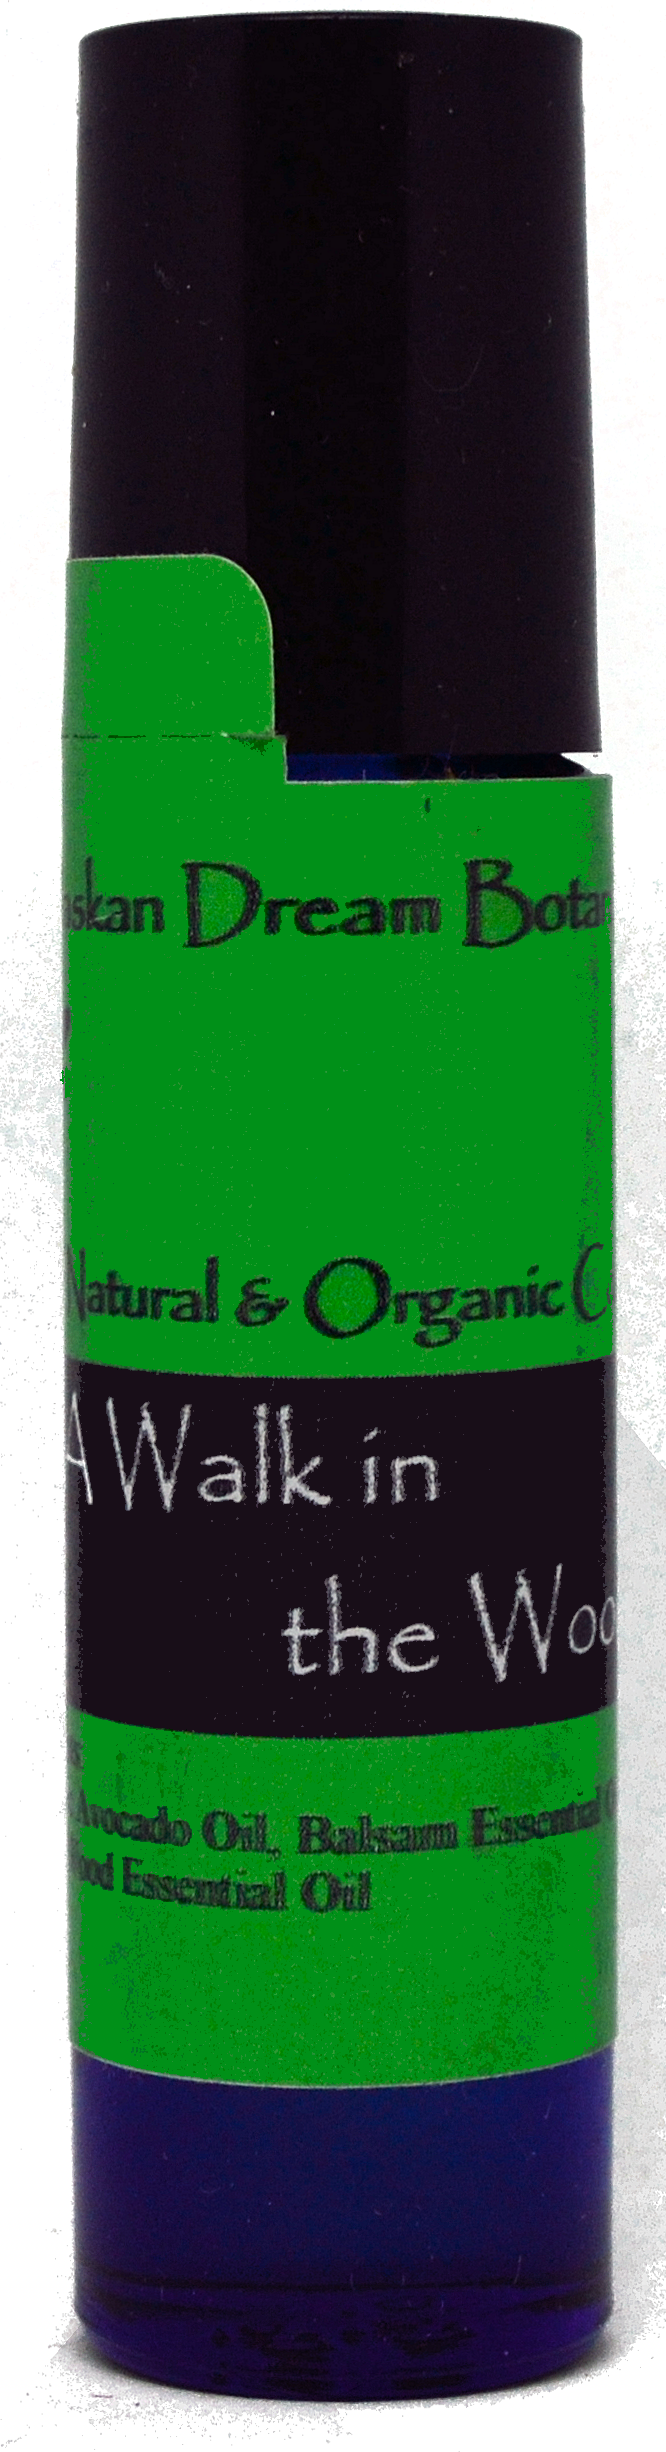 A Walk in the Woods Roll On Cologne/Perfume - Alaskan Dream Botanicals